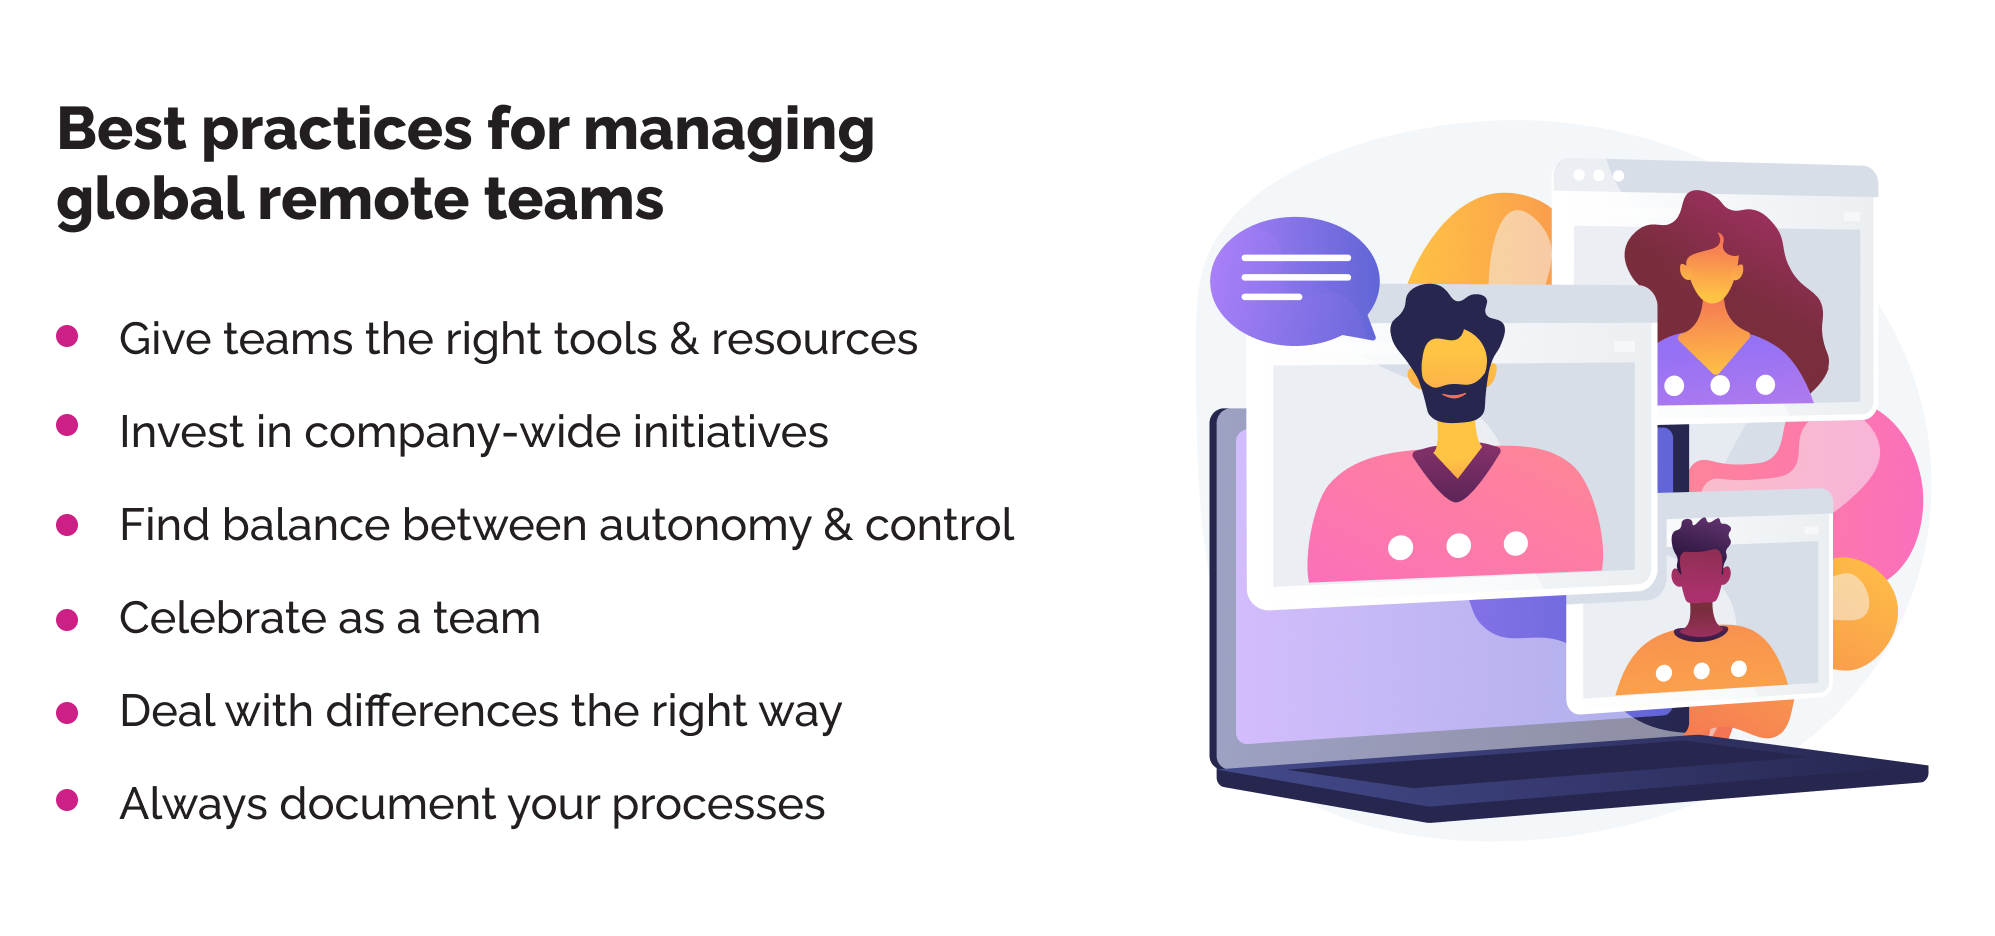 List of best practices for managing global remote teams and illustration of chat windows.